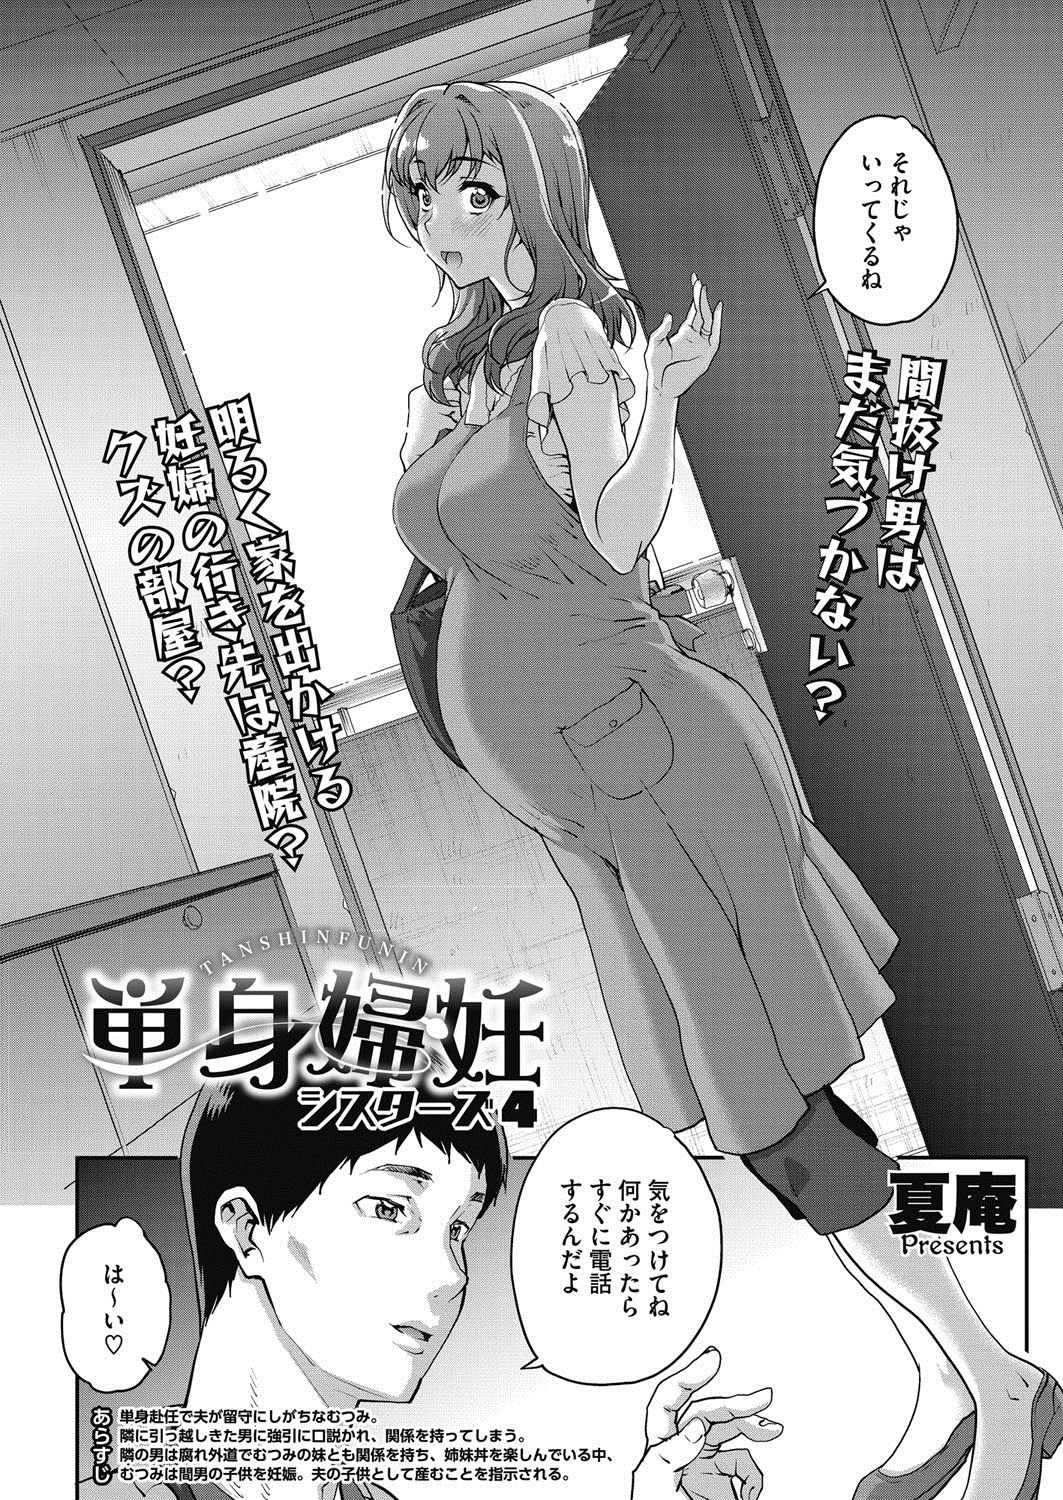 [Carn] Tanshinfunin ~Sisters~ Ch 1-7 